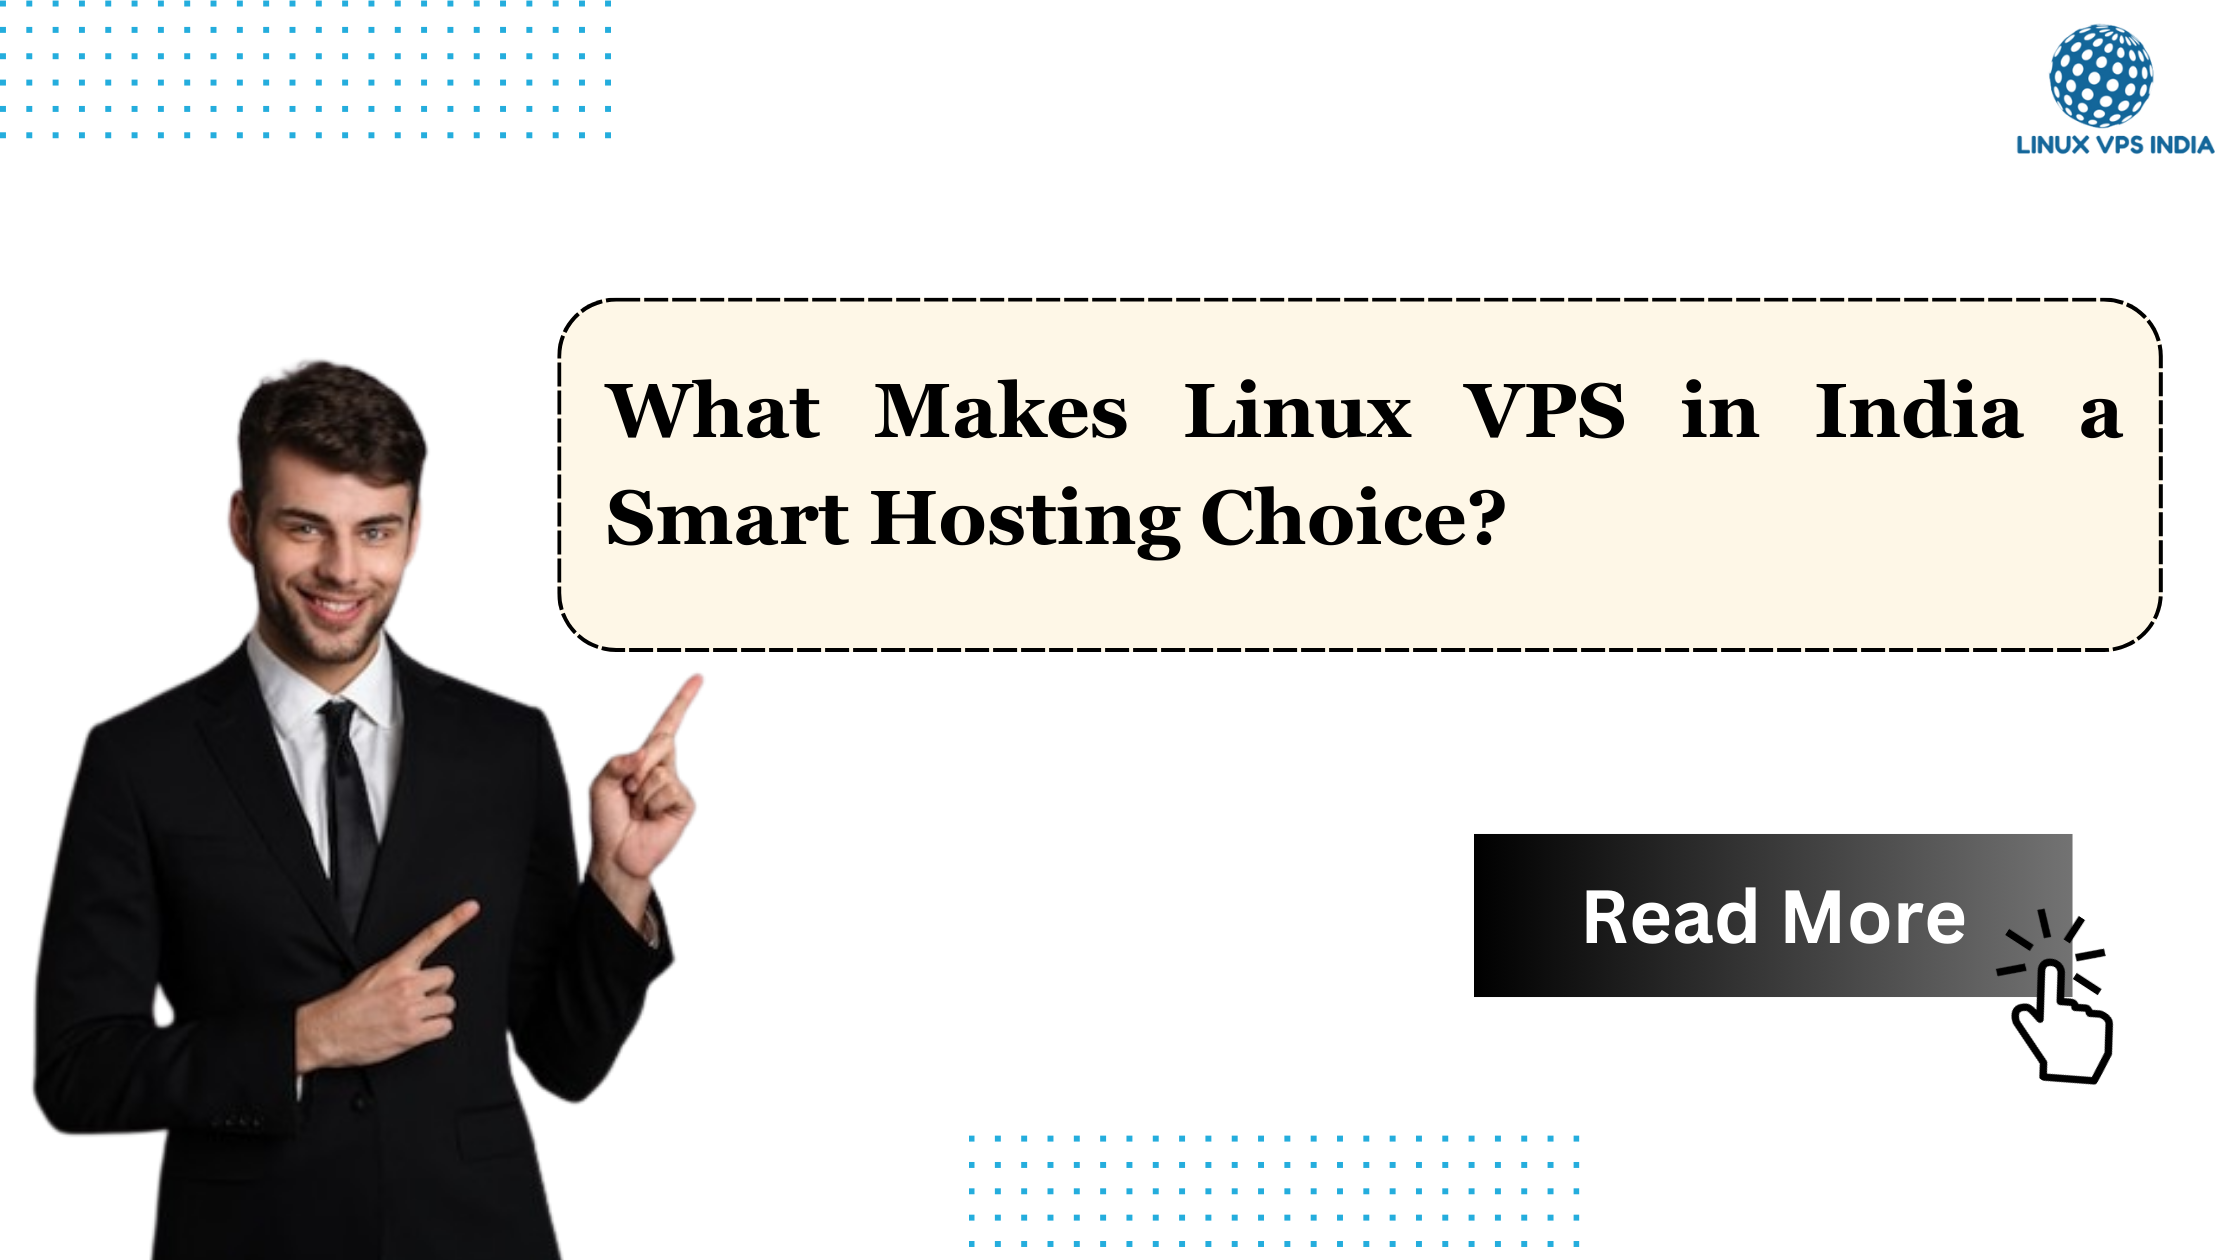 What Makes Linux VPS in India a Smart Hosting Choice